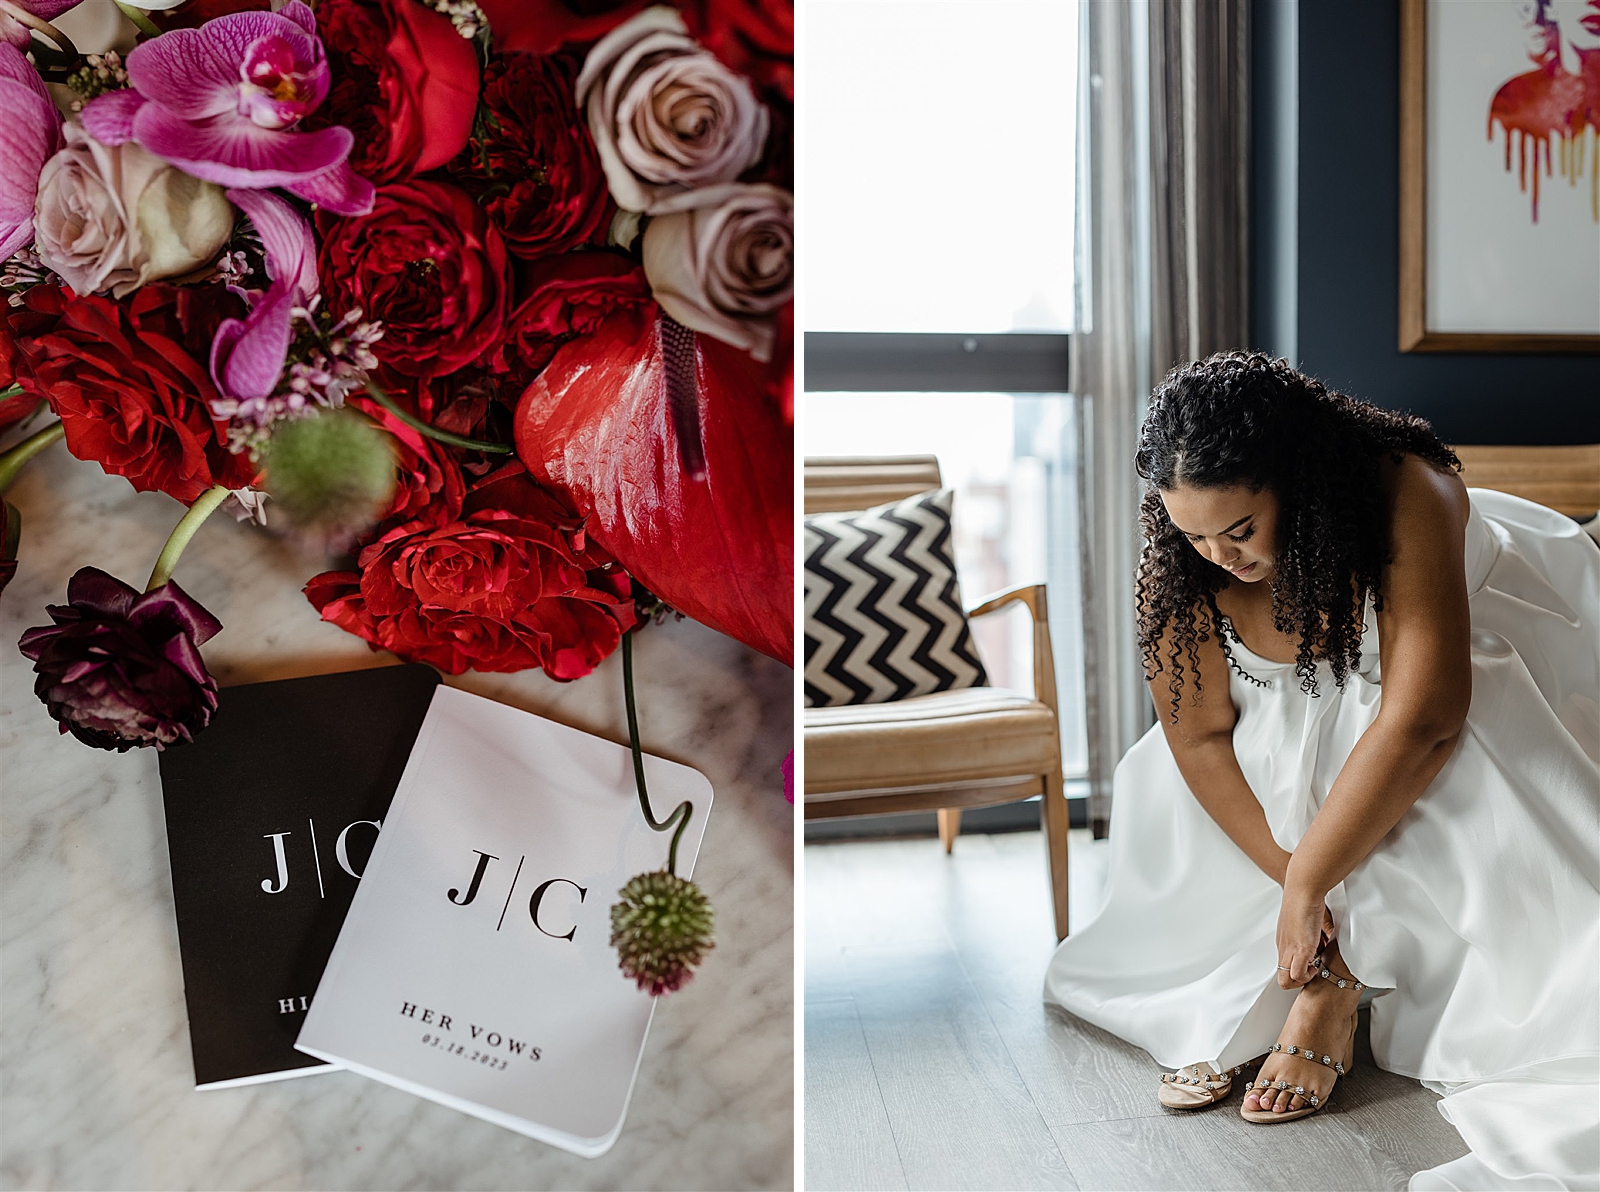 Left photo: Up close shot of the bride and grooms vow books surrounded by a floral arrangement. 
Right photo: Bride in her wedding gown adjusting her shoe straps. 